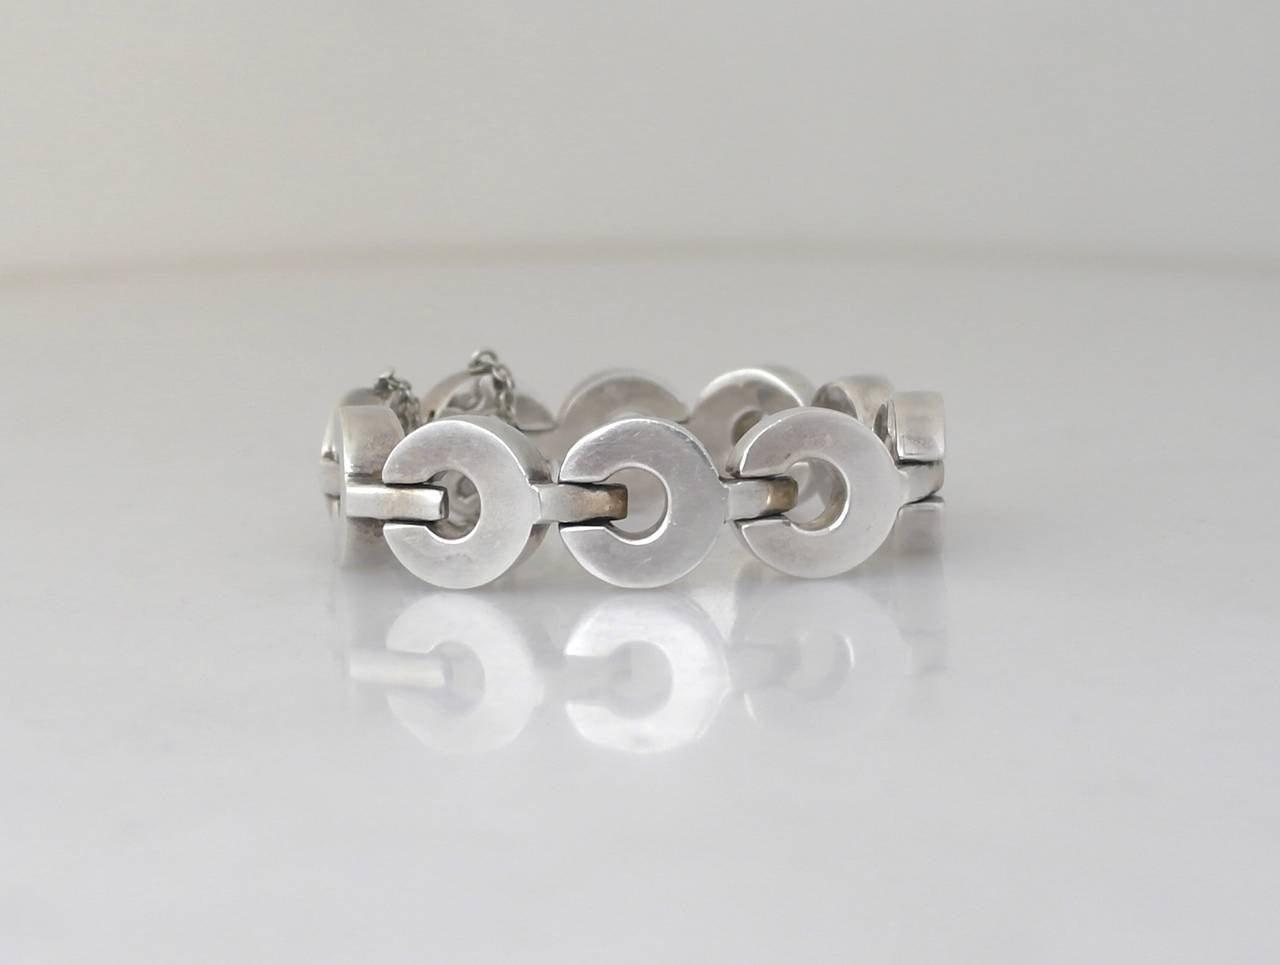 Being offered is a .970 silver link bracelet by Antonio Pineda of Taxco, Mexico; comprising heavy gauge 'C' shaped links with a tongue & box closure; security chain. Dimensions: 3/4